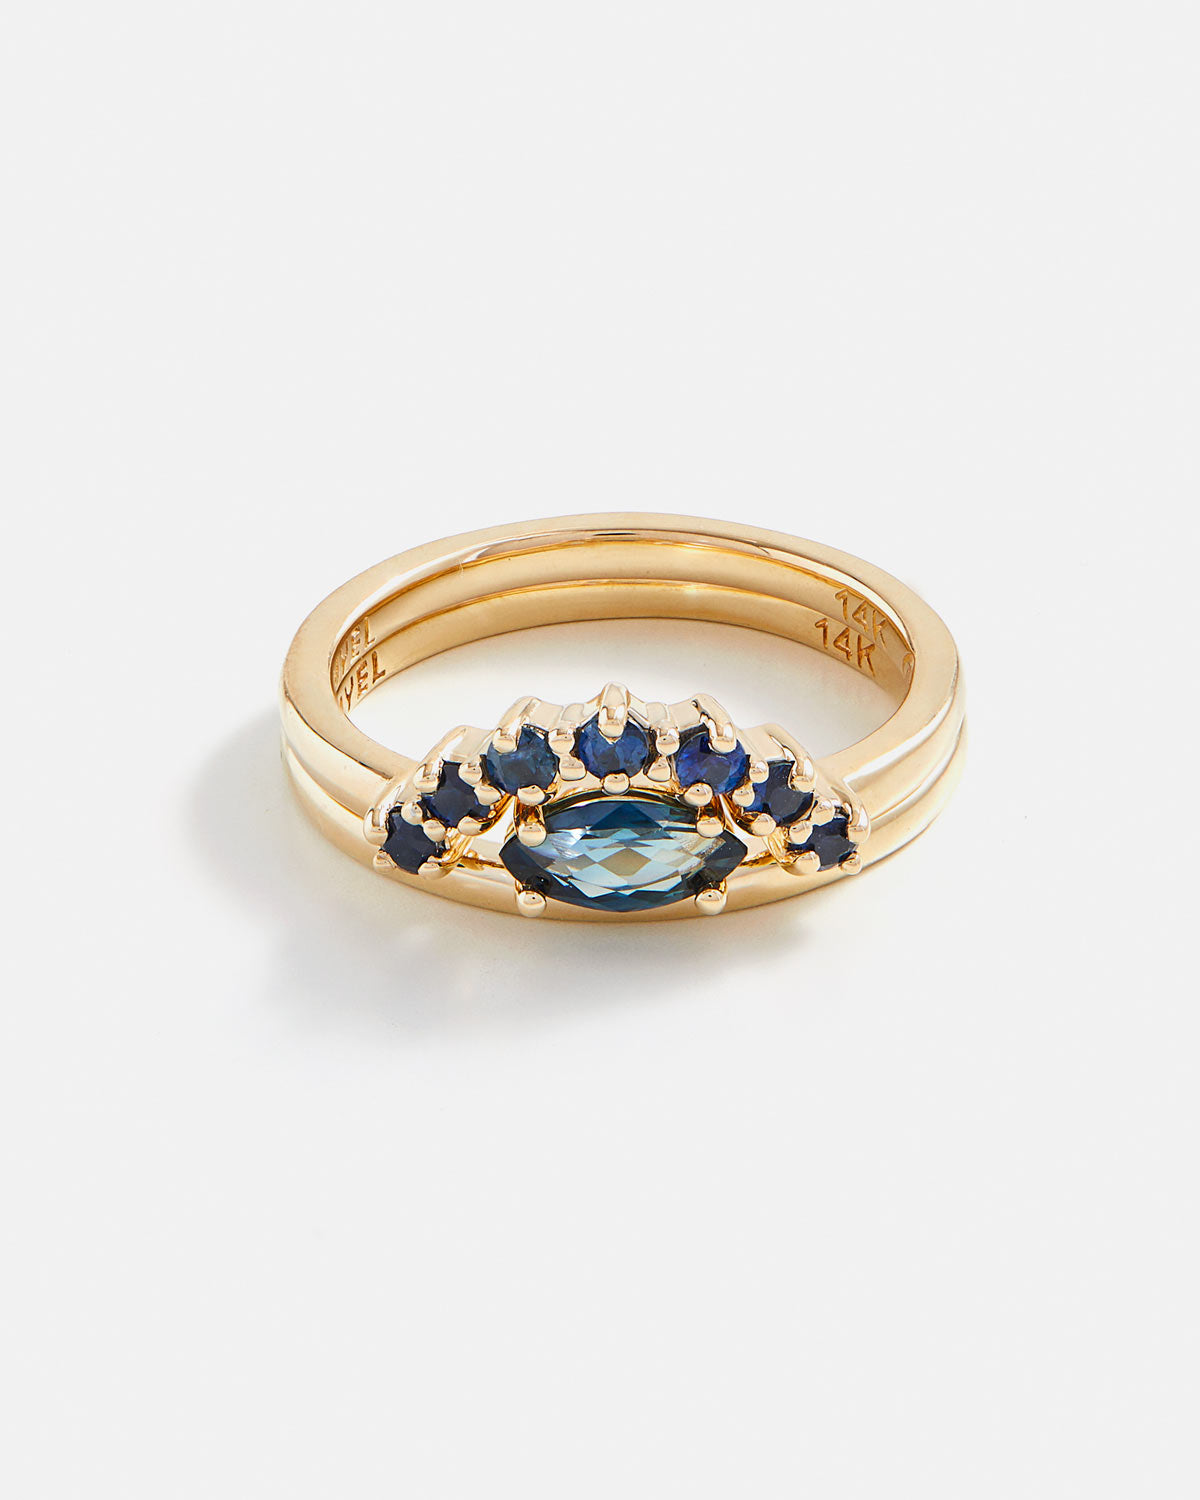 Off-Set Marquise Ring in 14K Fairmined Gold and Wave Band with Australian Sapphires